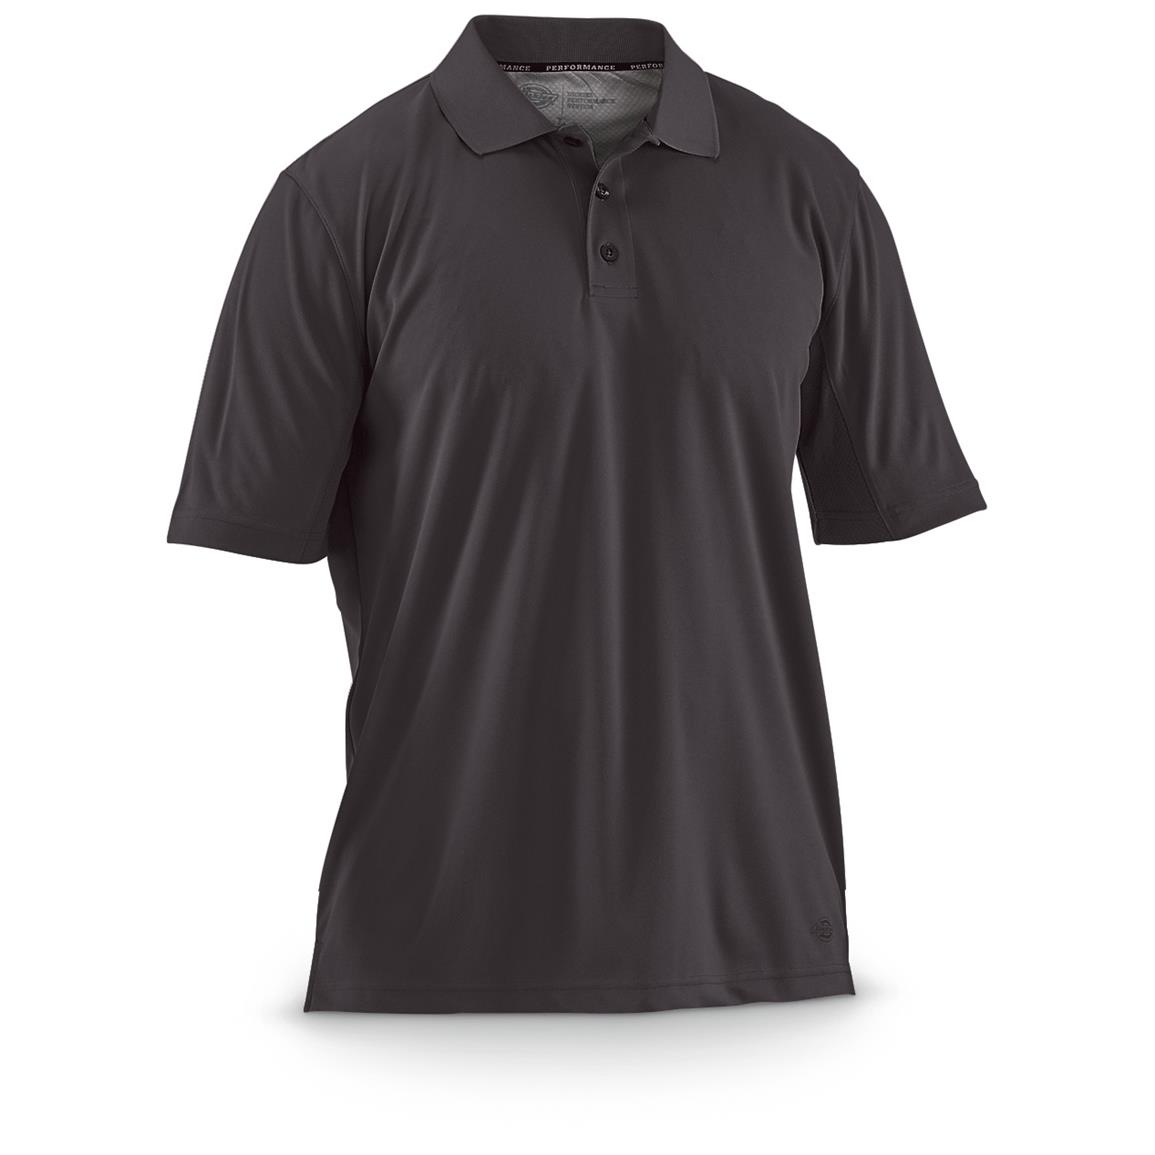 Dickies Men's DPS Cooling Polo Shirt - 657351, Shirts at Sportsman's Guide